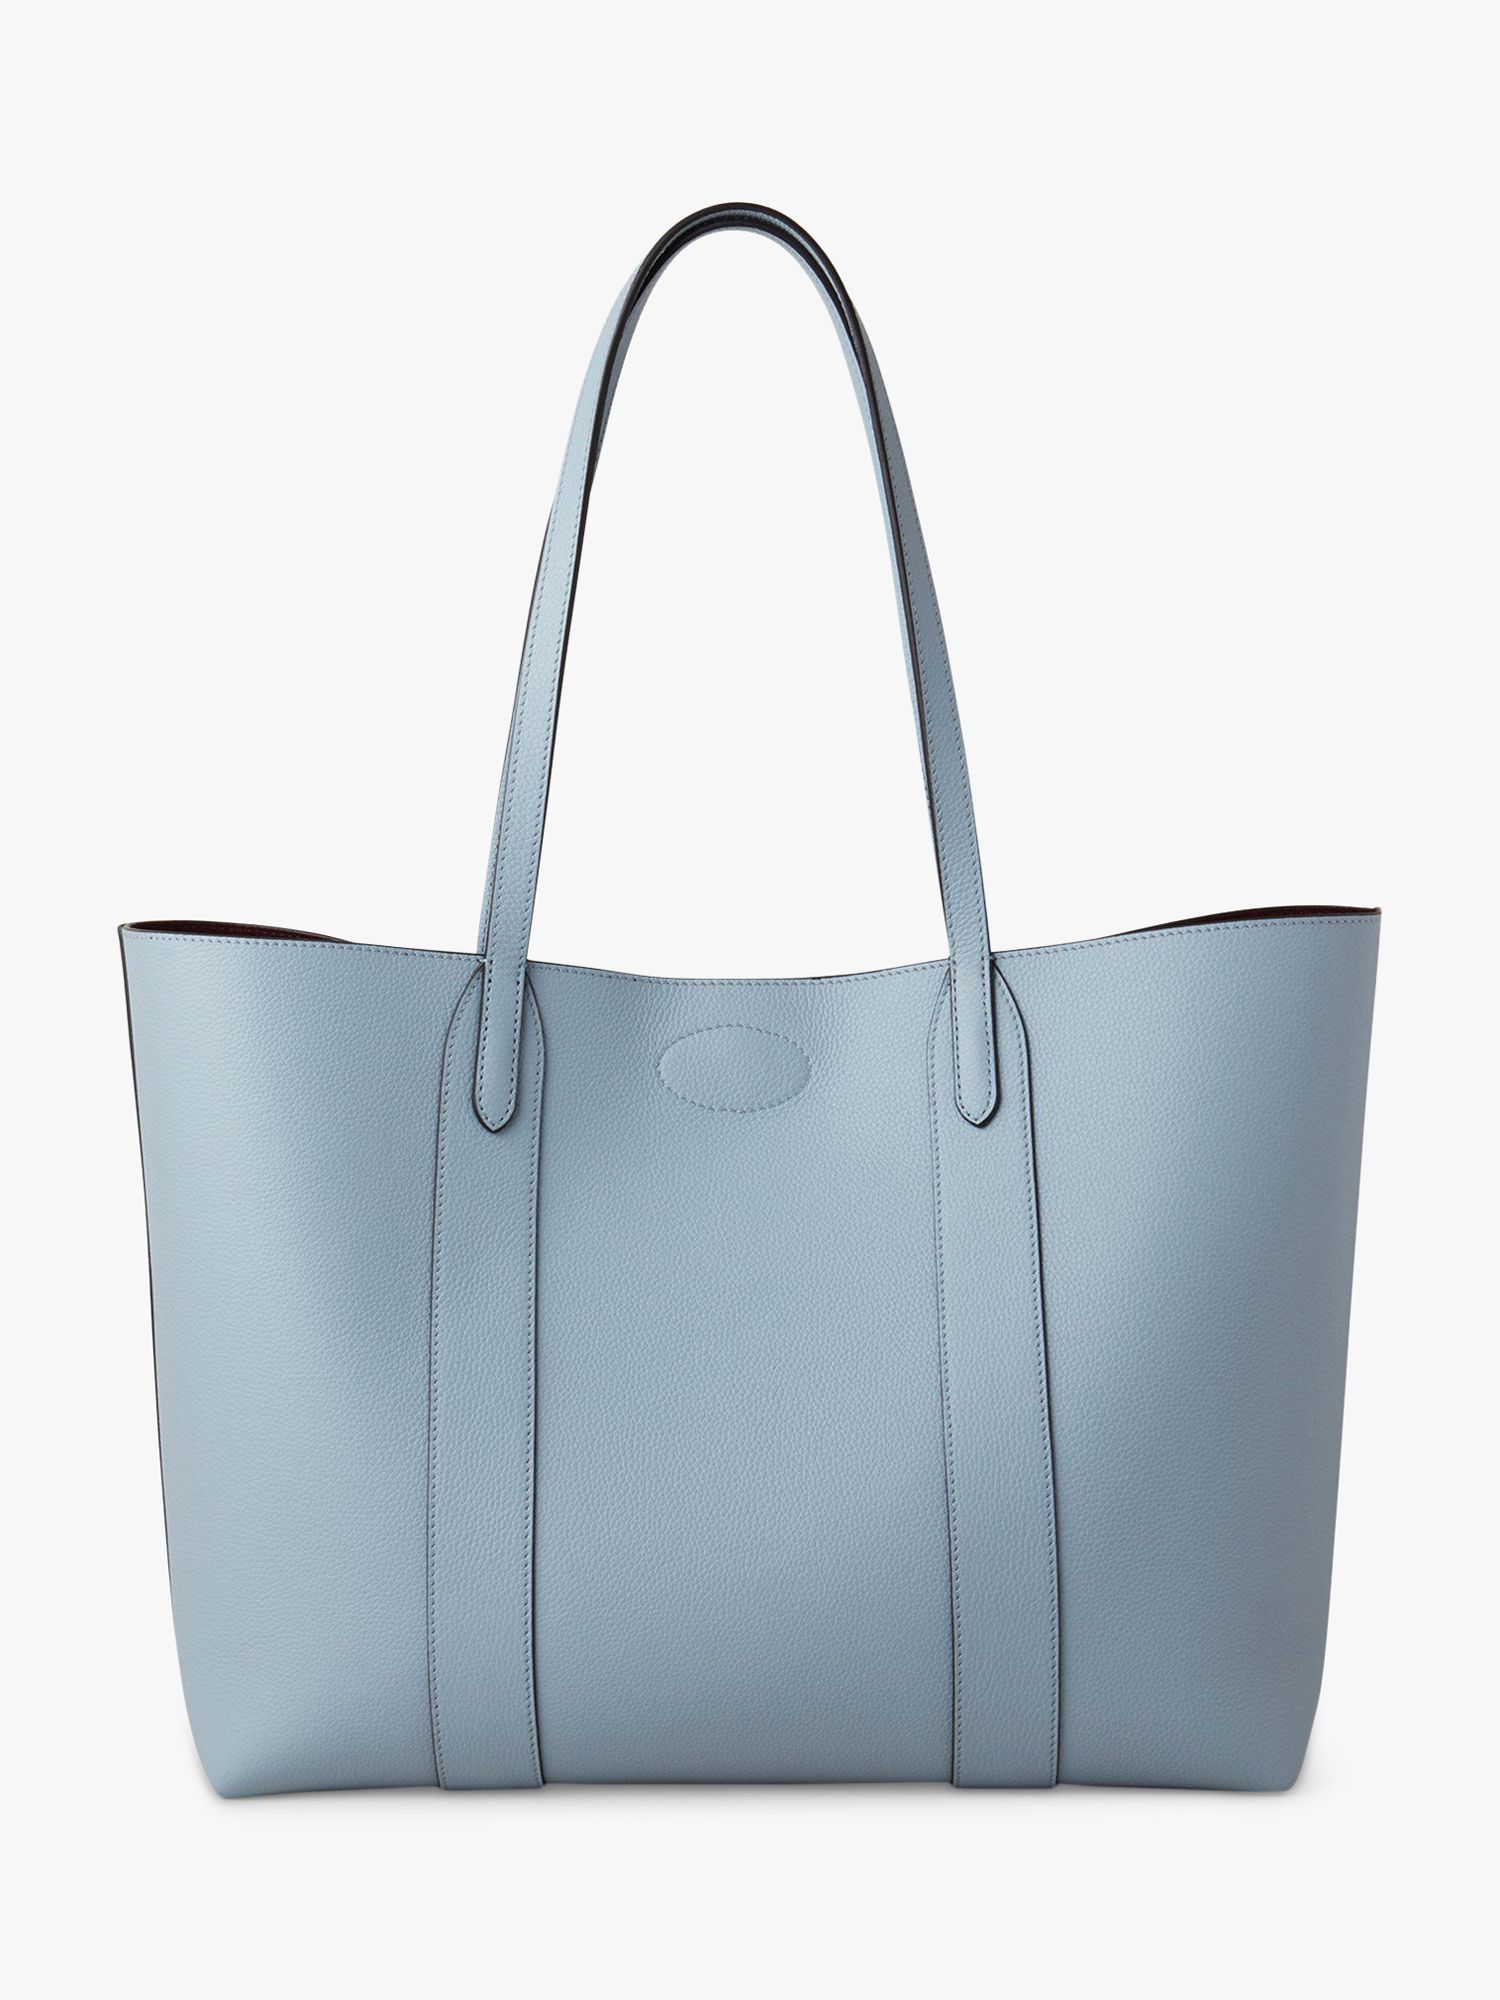 Mulberry Bayswater Small Classic Grain Leather Tote Bag, Poplin Blue ...